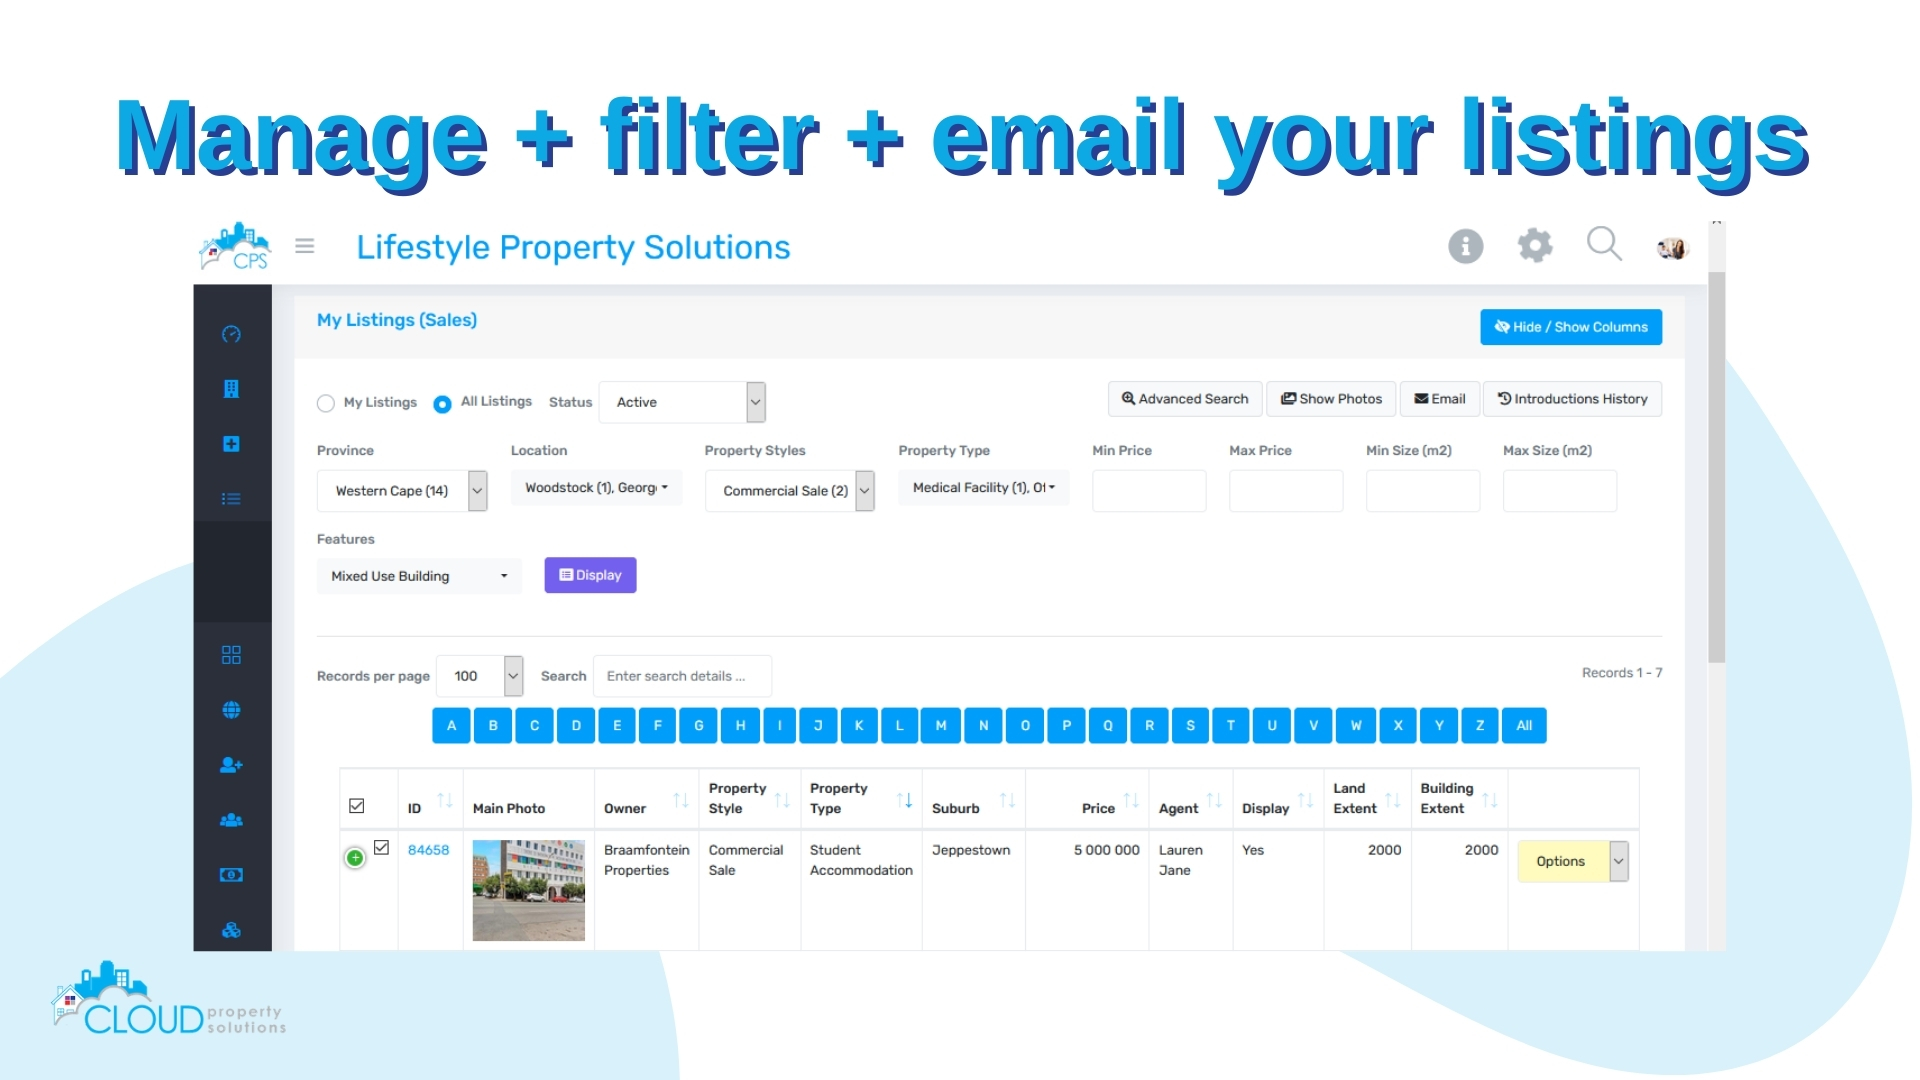 Manage, filter and share listings with your database